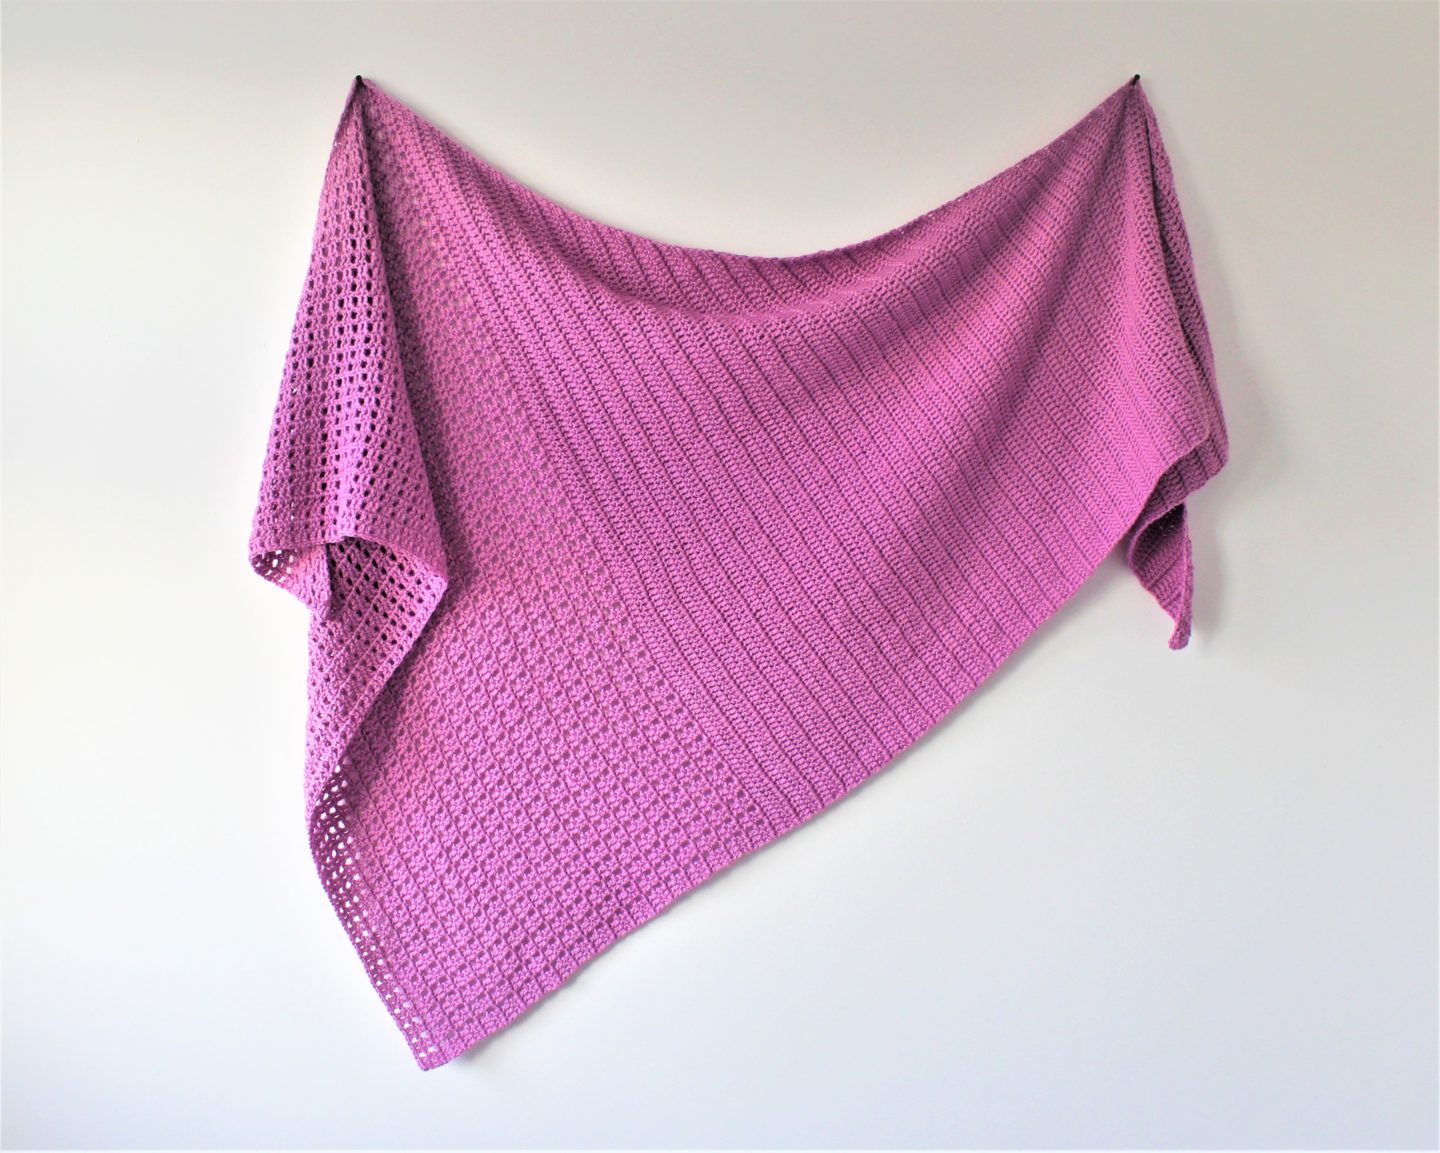 This is the brielle shawl this shawl features an asymmetric design.